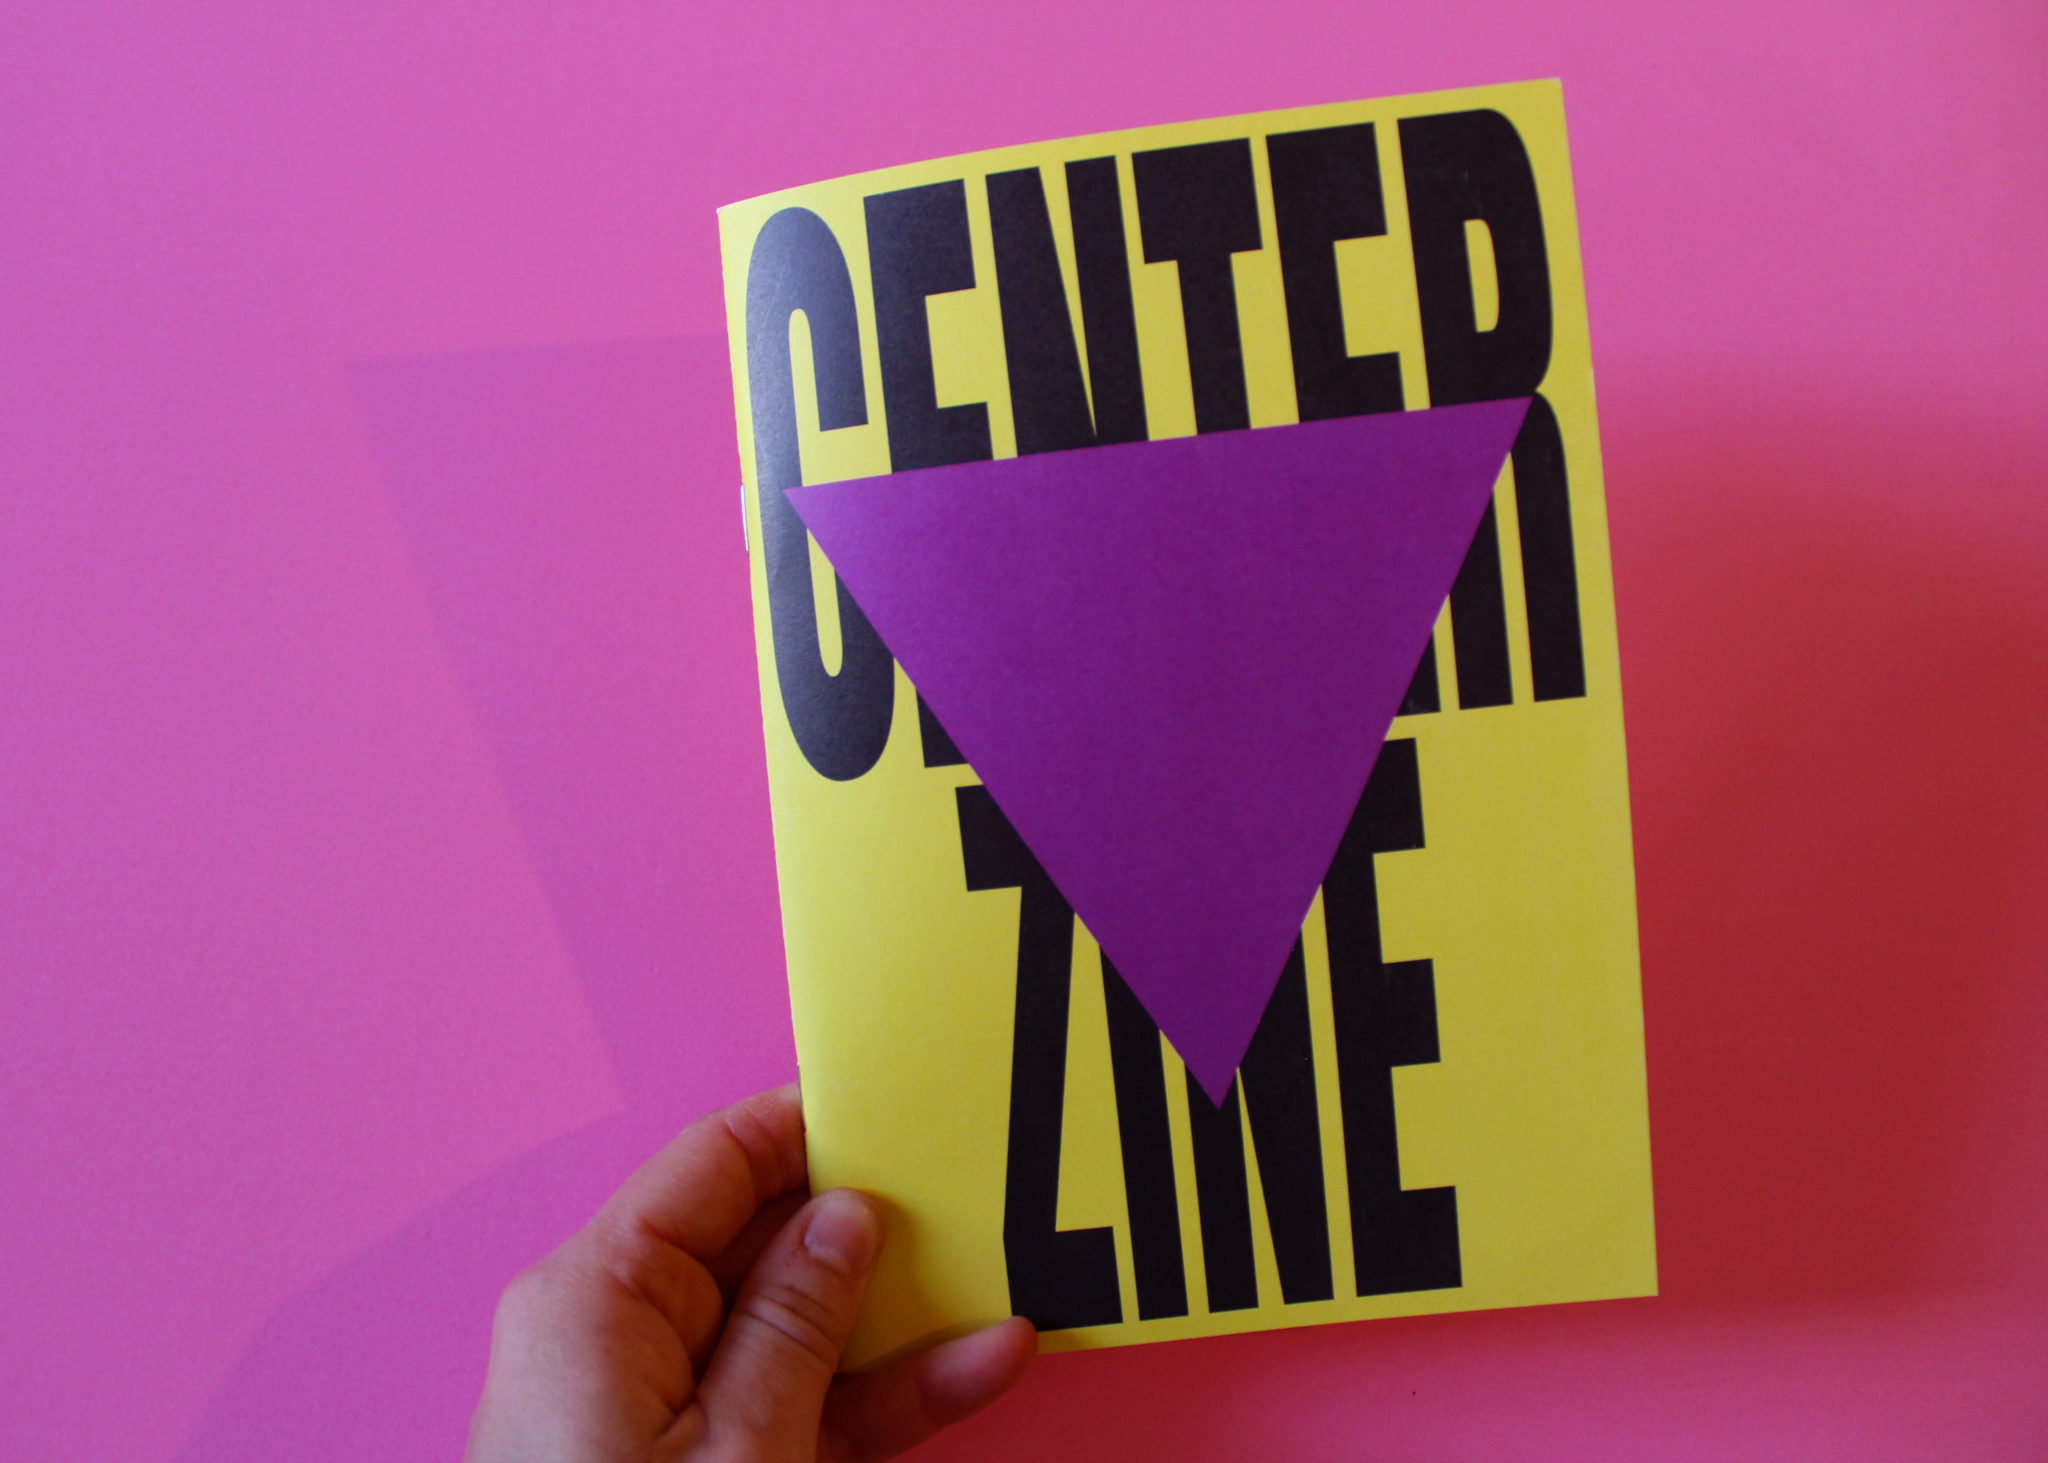 A white person's hand holds Centre zine. It has a bright yellow cover with bold black letters overlaid with a purple triangle. The text says 'Centre Zine'.